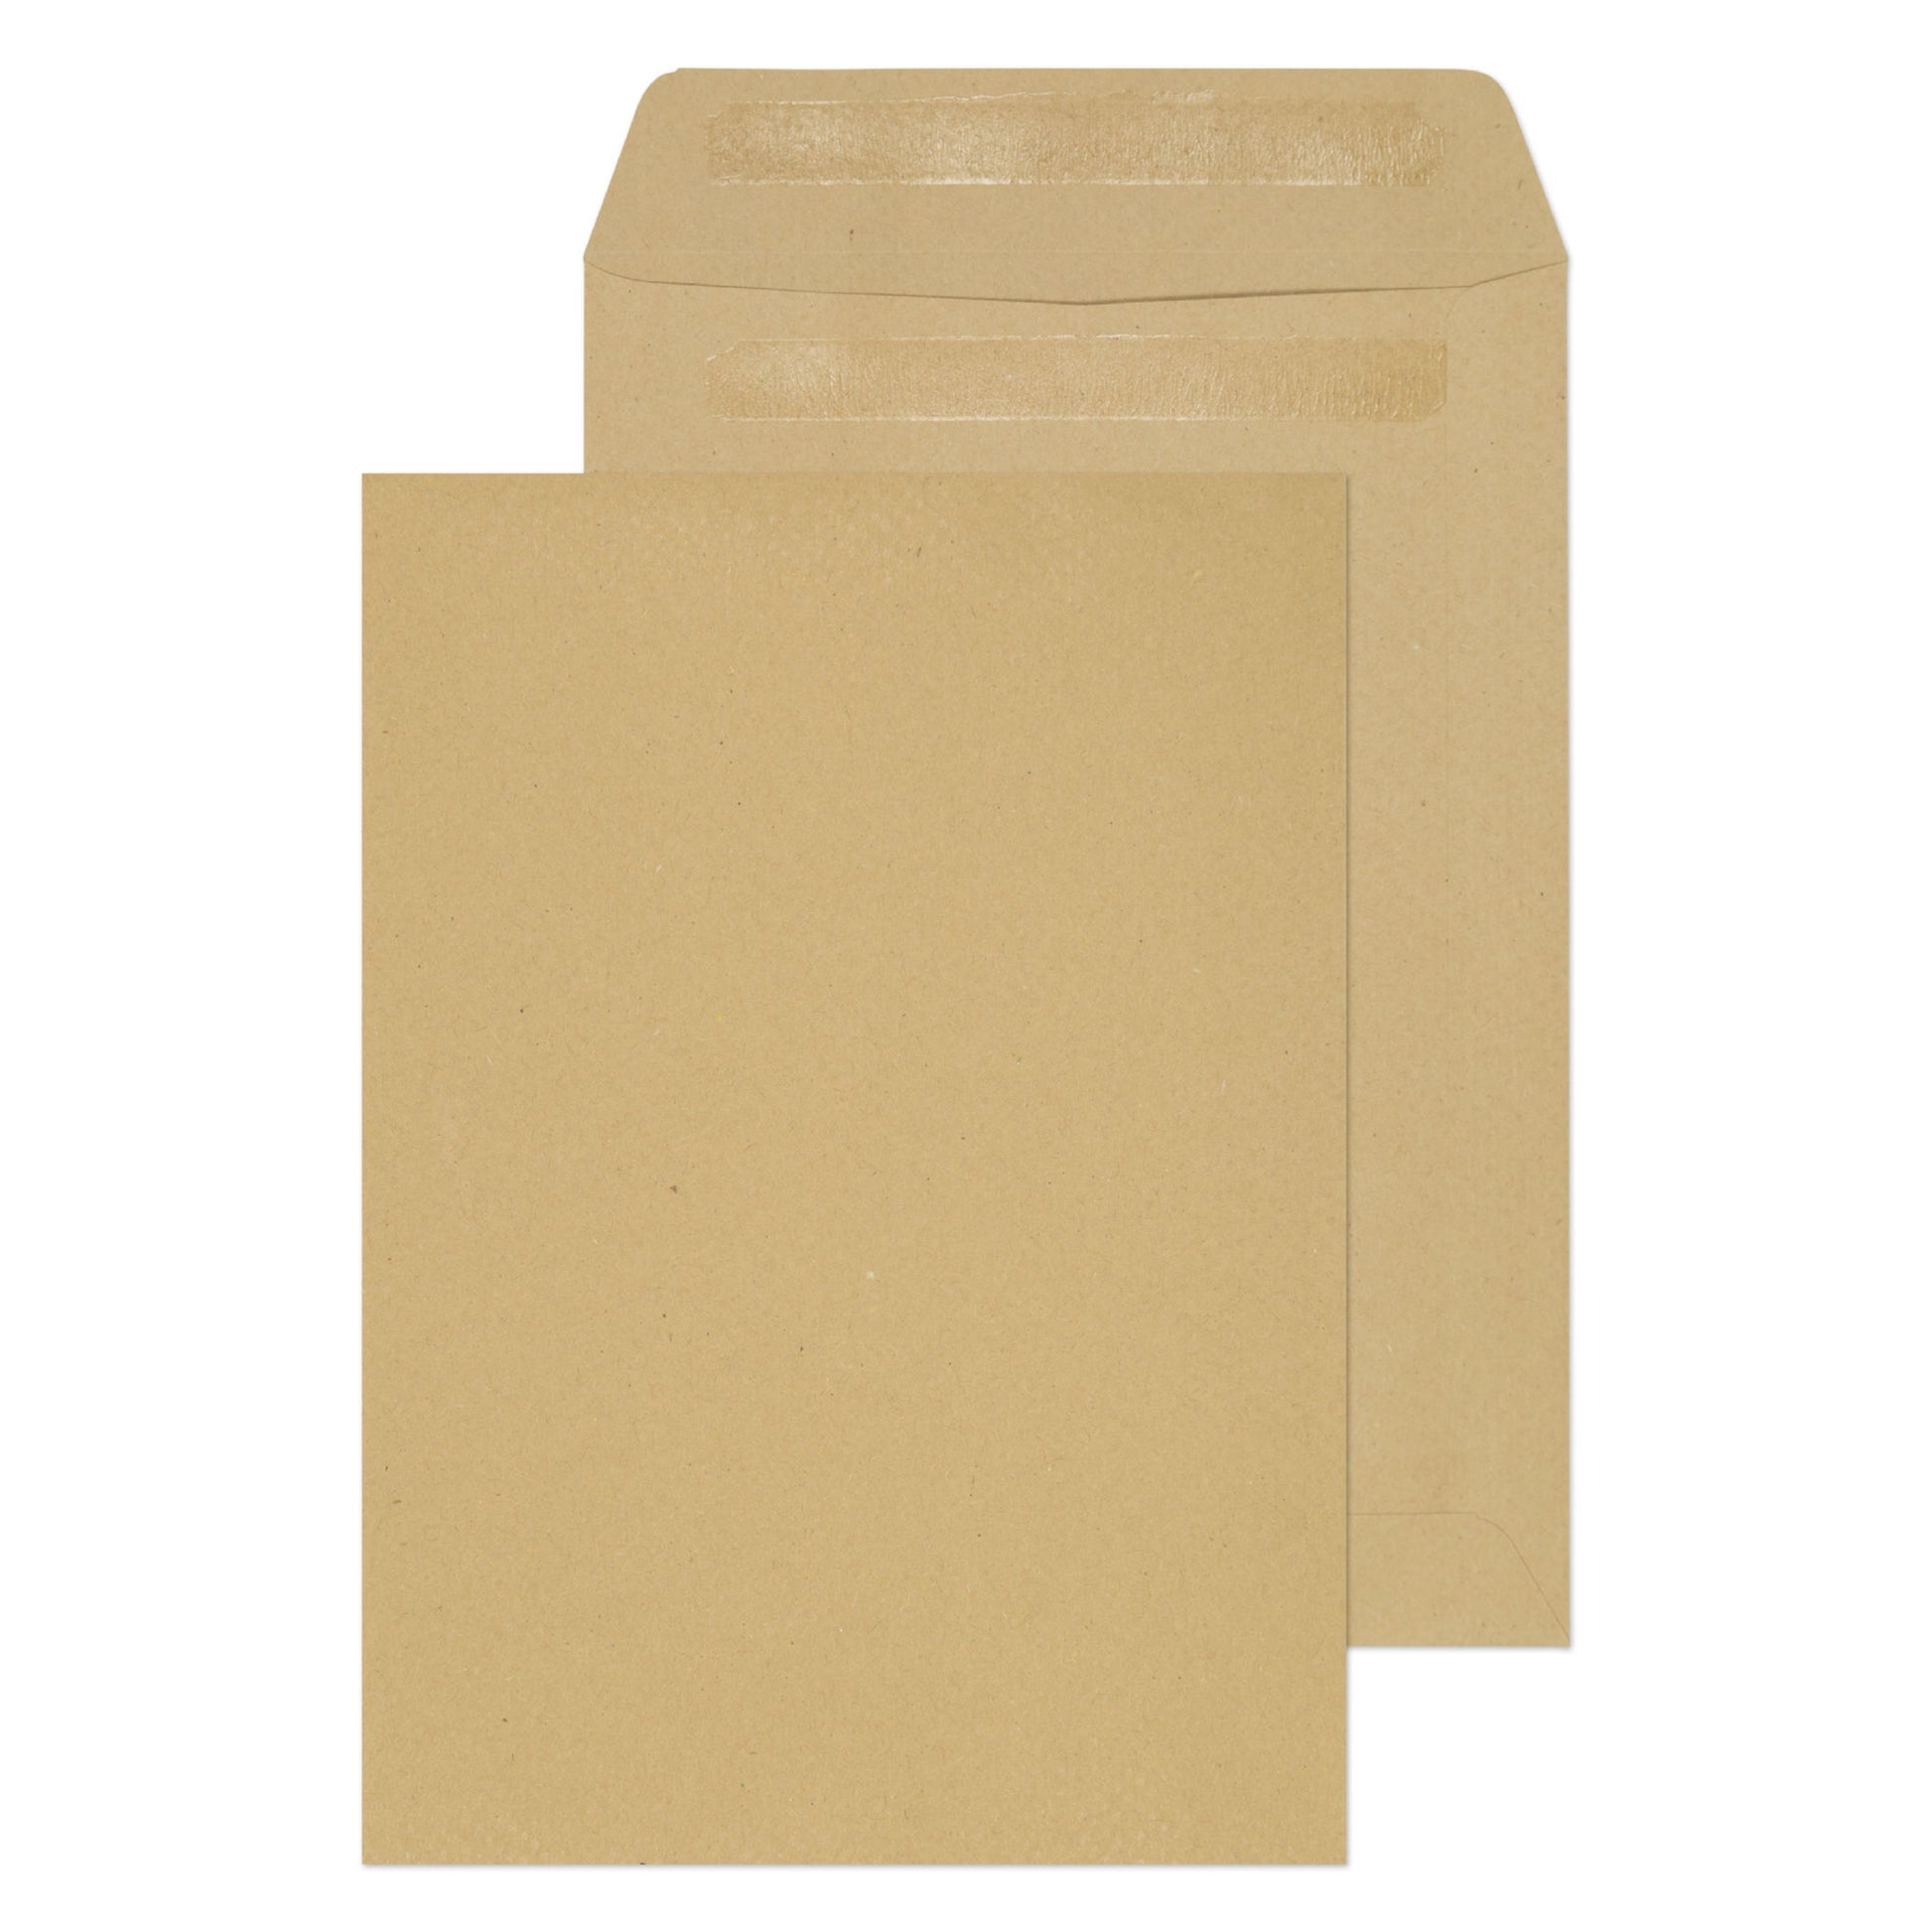 ValueX Pocket Envelope C5 Self Seal Plain 115gsm 80% Recycled Manilla (Pack 500) - 14899 - NWT FM SOLUTIONS - YOUR CATERING WHOLESALER